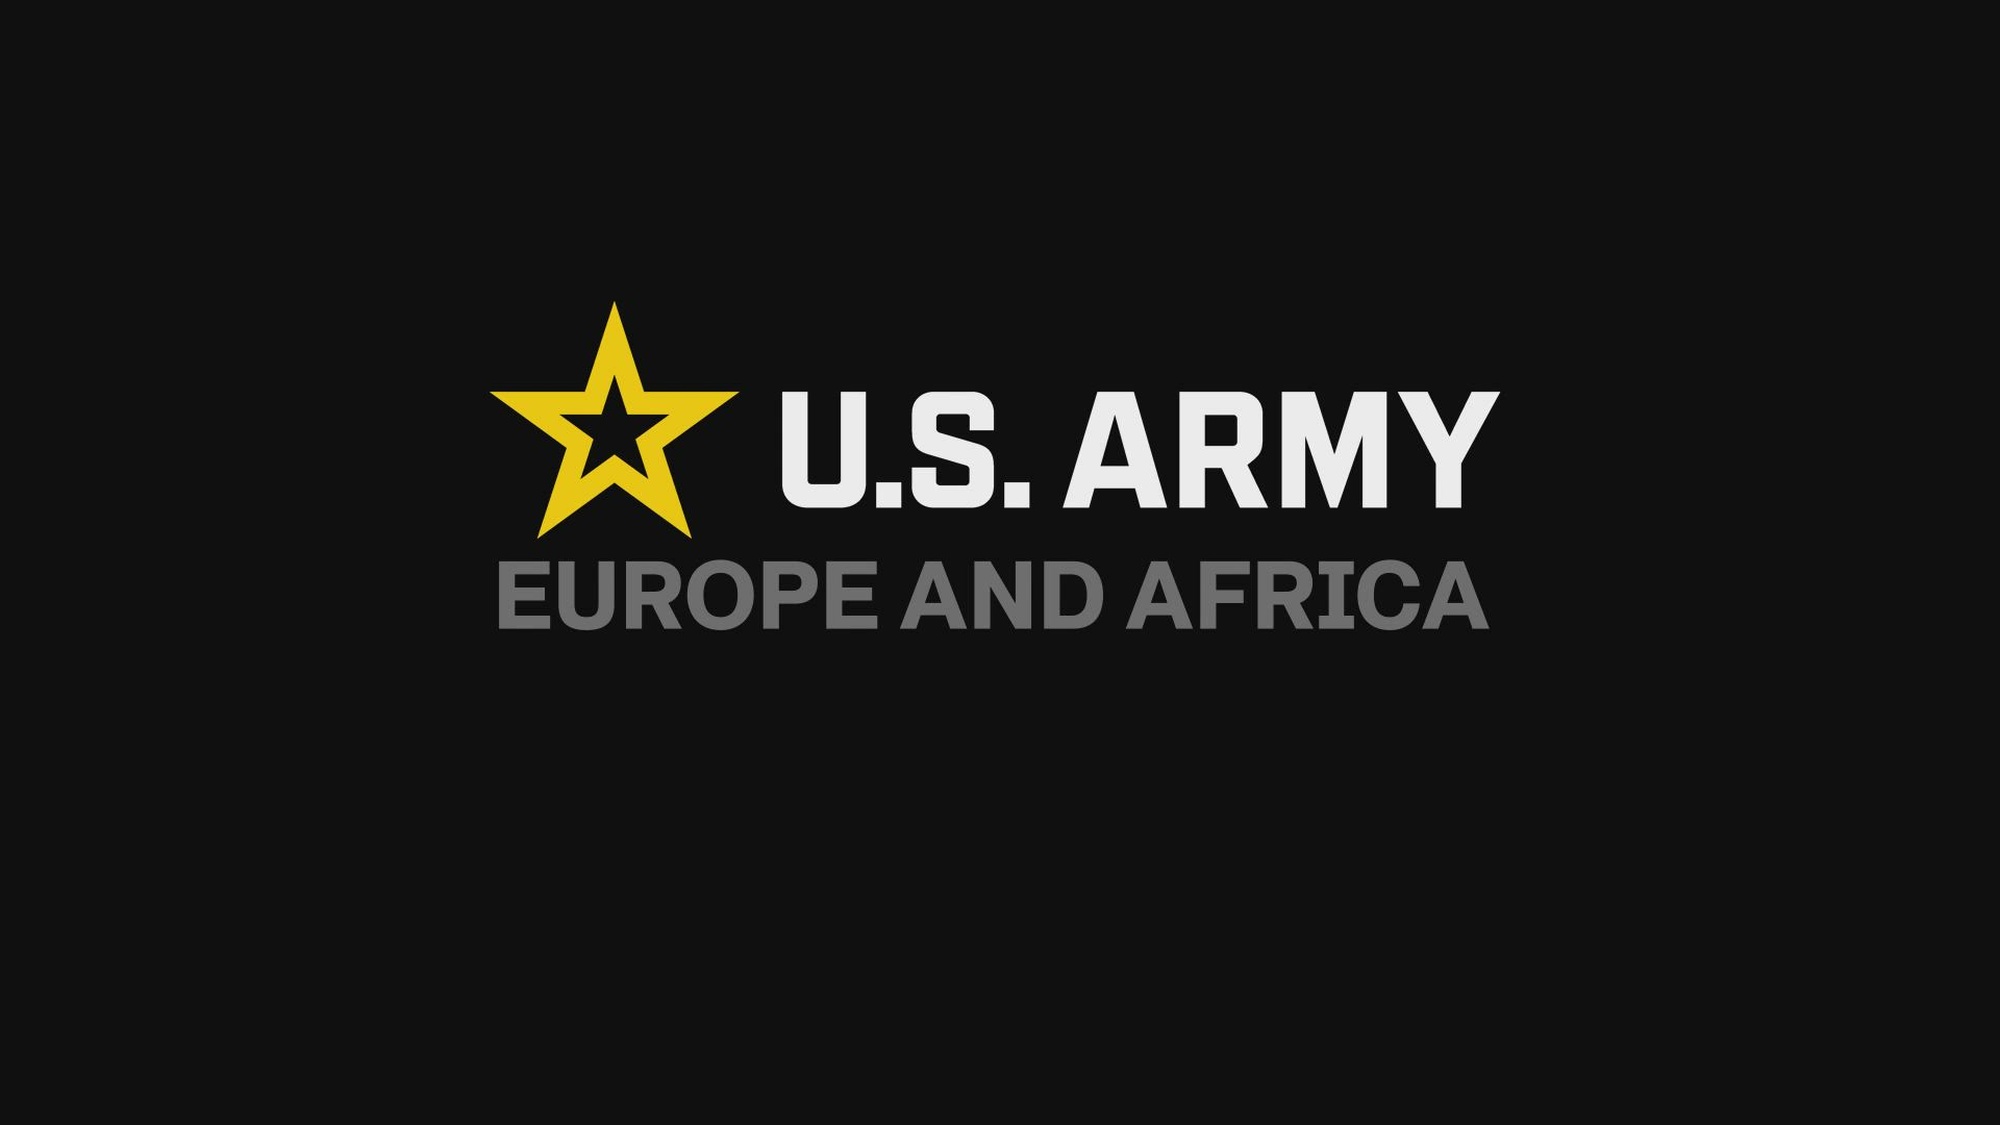 U.S. Army Europe and Africa Command Video 2023 - U.S. Army Europe and Africa is uniquely positioned in its 104 country area of responsibility to honor our commitment to upholding the principles of the rules-based international order by providing significant combat-credible forces throughout Europe and Africa. (U.S. Army video by Staff Sgt. James Garvin)